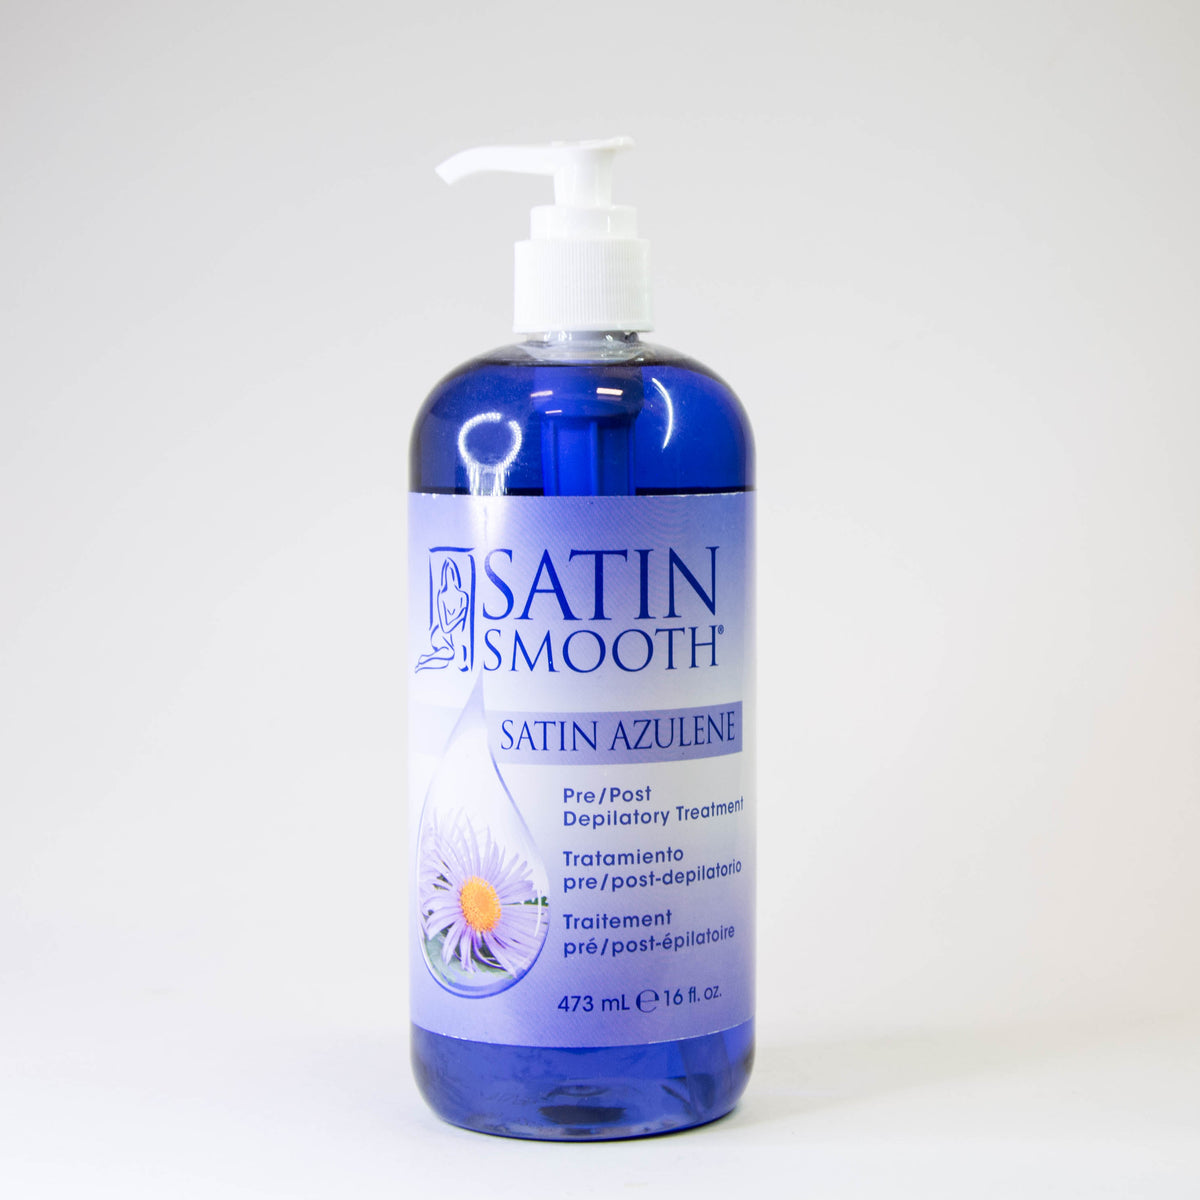 SATIN SMOOTH Wax Residue Remover Oil - Satin Release, 16 Fluid- Ounces :  : Beauty & Personal Care